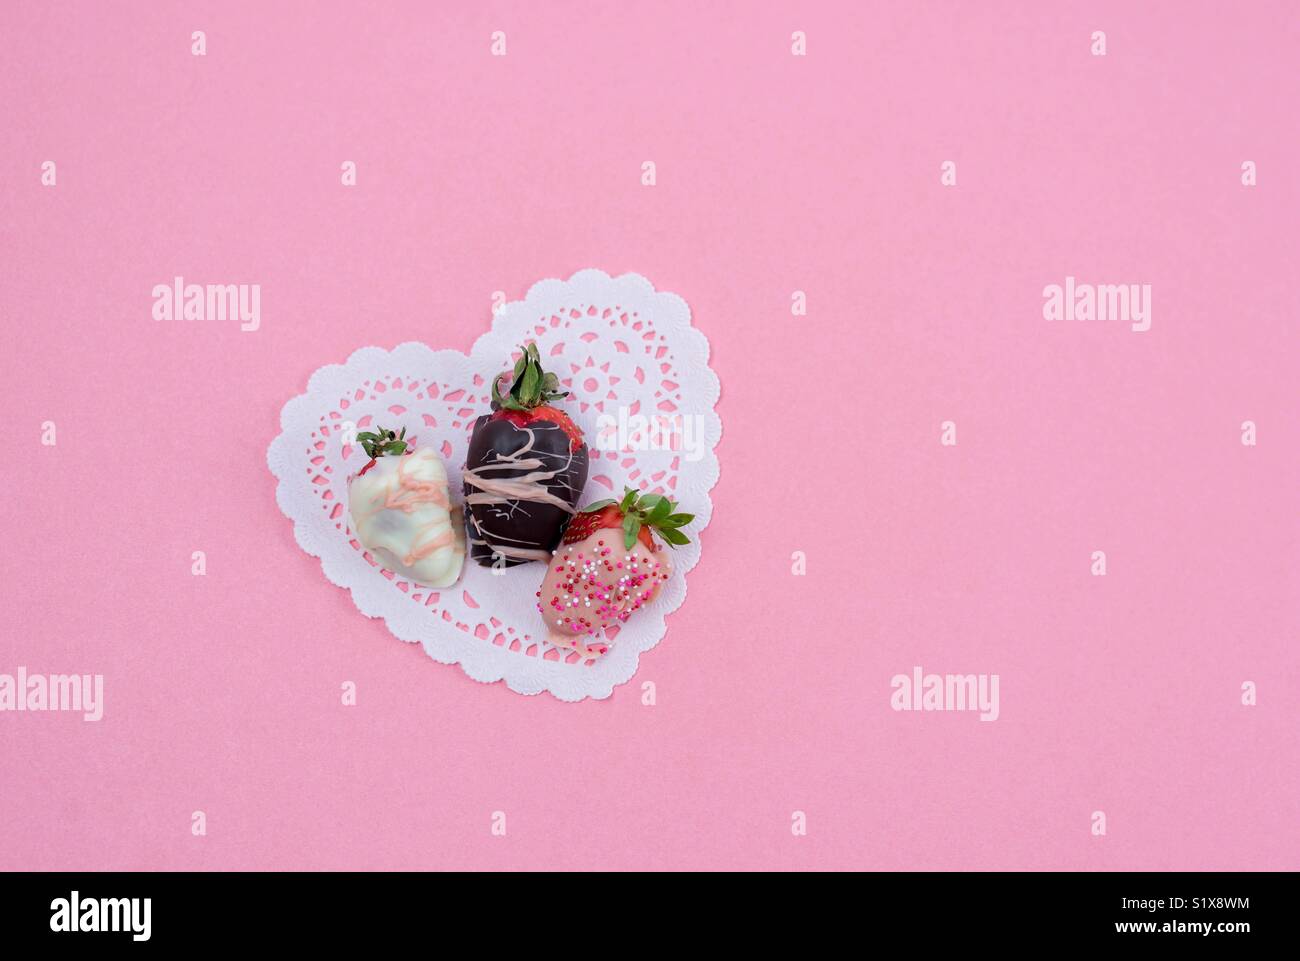 Chocolate dipped strawberries on heart shaped paper doily on pink background with space for copy Stock Photo